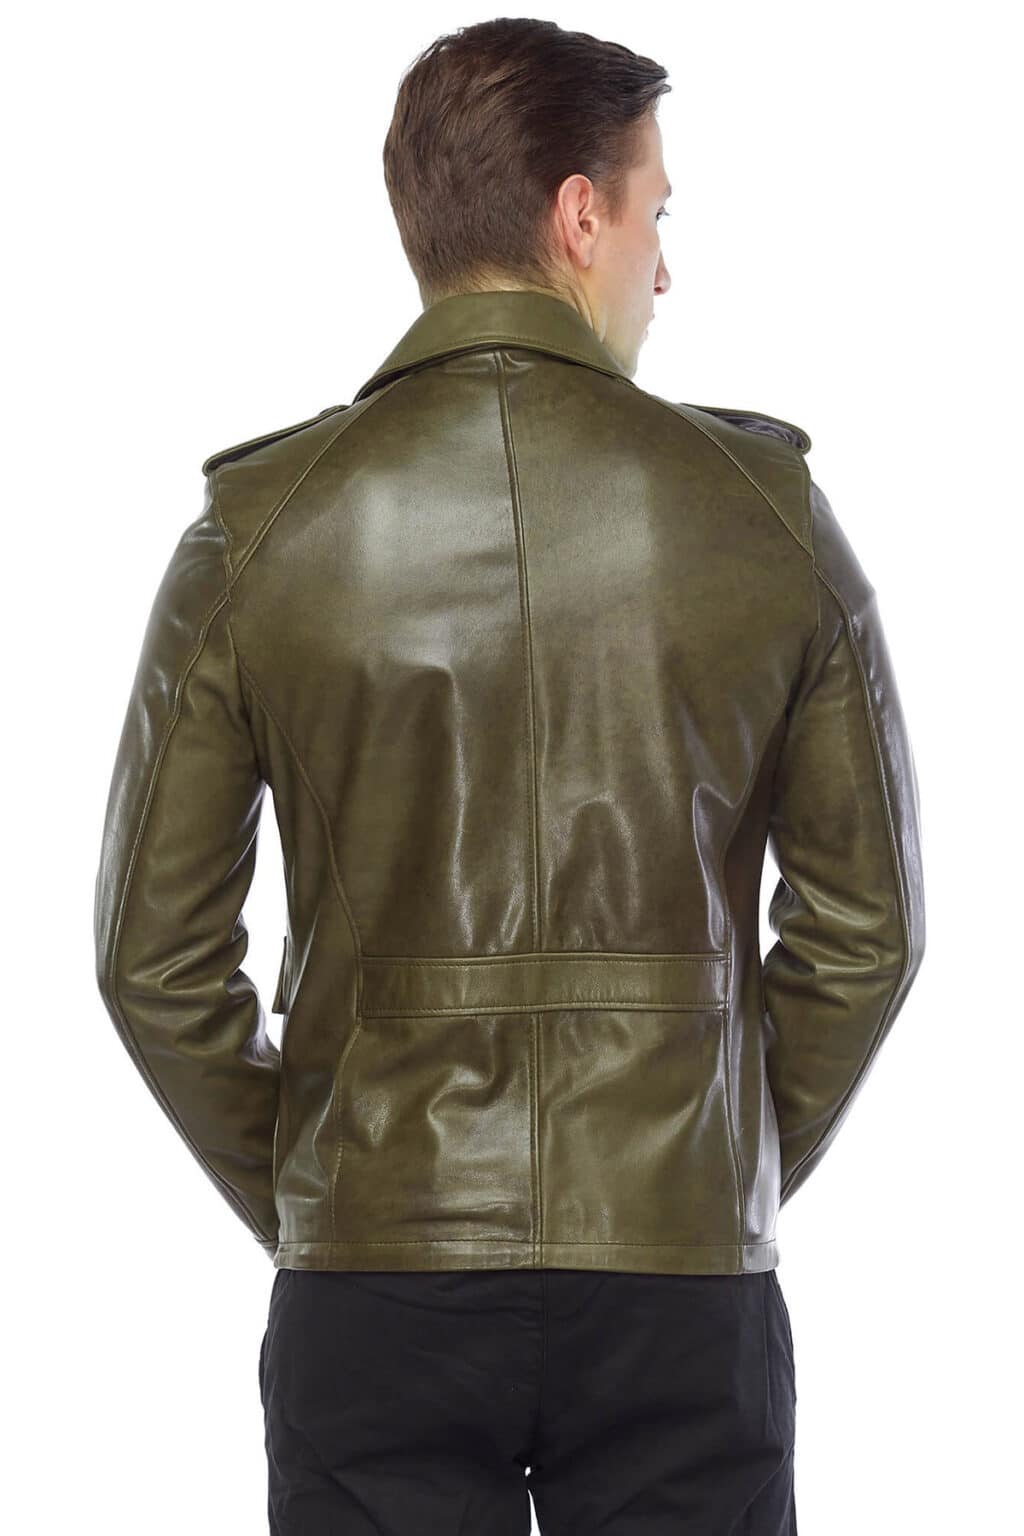 Authentic Leather Coat for Sale - Best Flight Leather Jacket